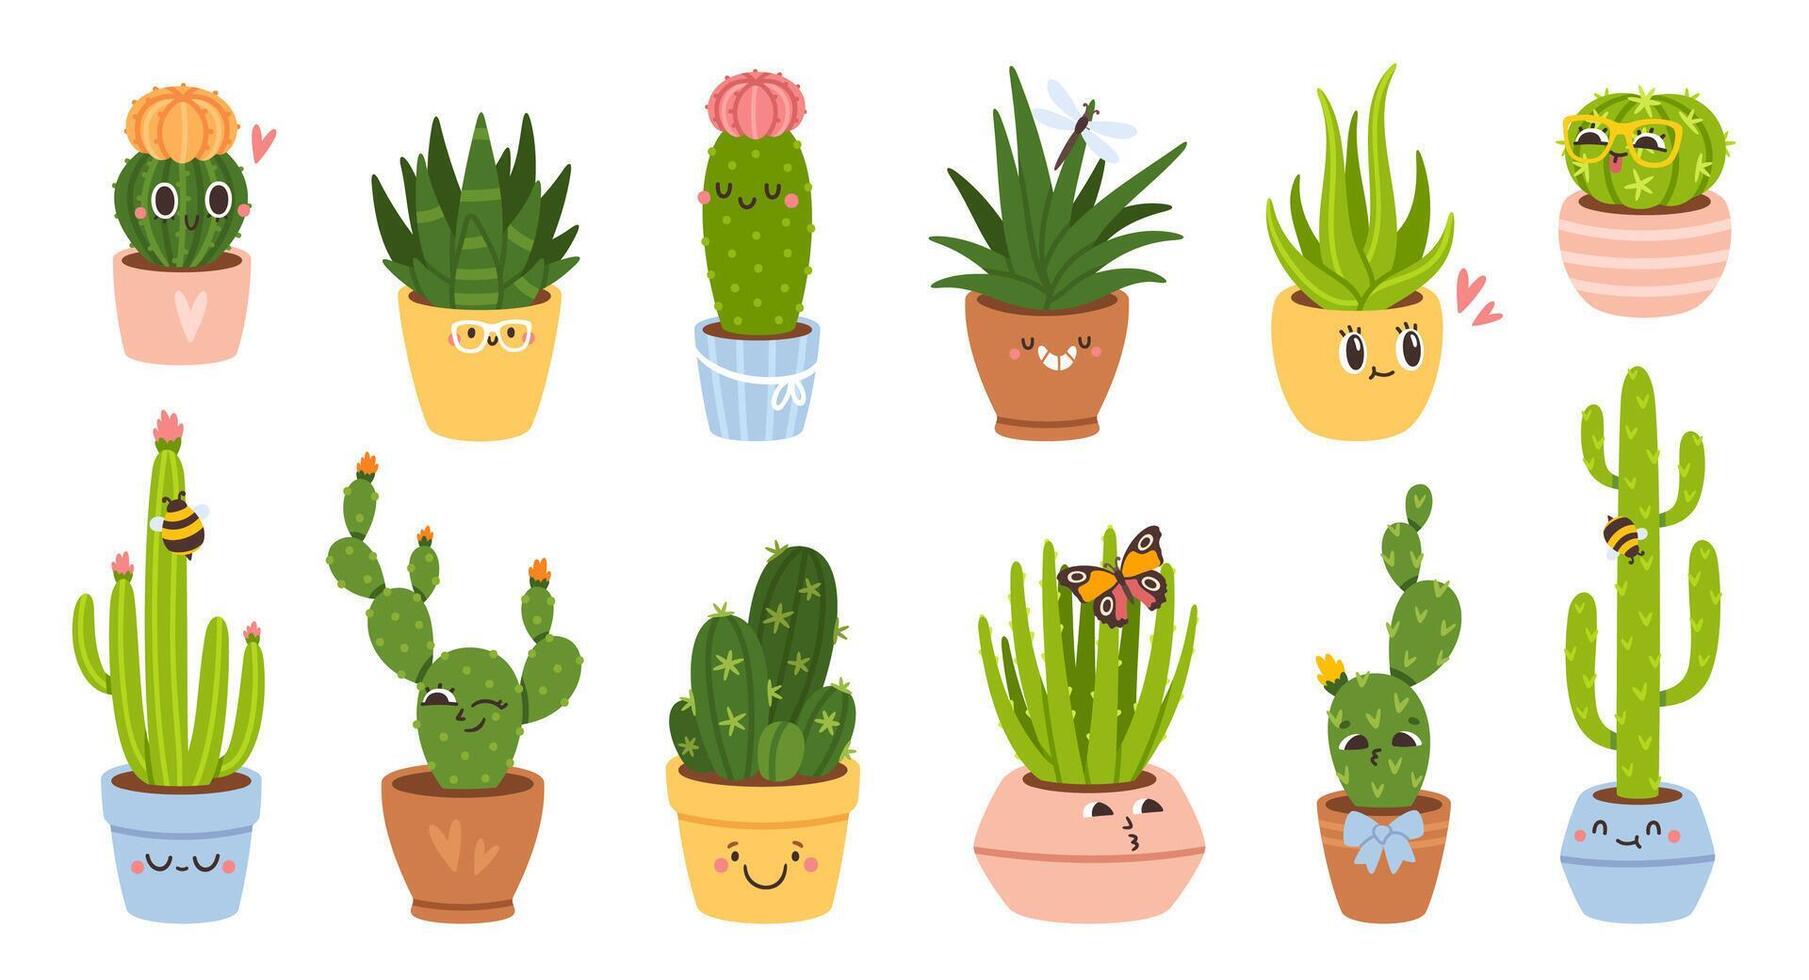 Cute cactus. Cartoon cactuses, succulents or cacti plant characters in pots. Mexican prickly plants with funny faces and emotion. Fun home cacti stickers and badges. set vector